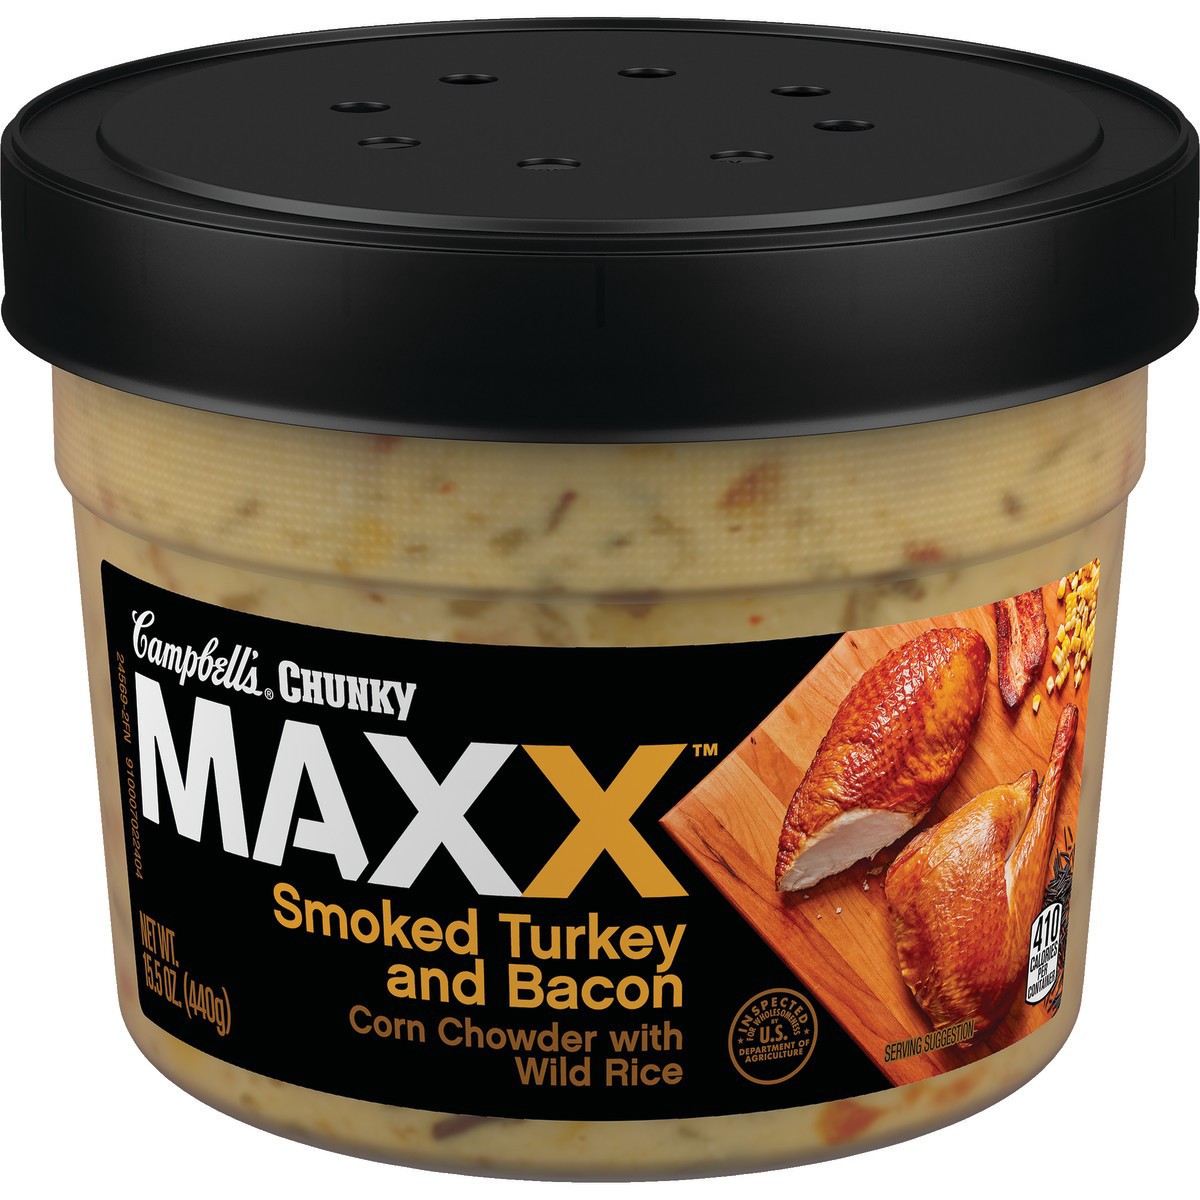 slide 1 of 6, Campbell's Chunky Maxx Smoked Turkey And Bacon Corn Chowder With Wild Rice, 15.5 oz